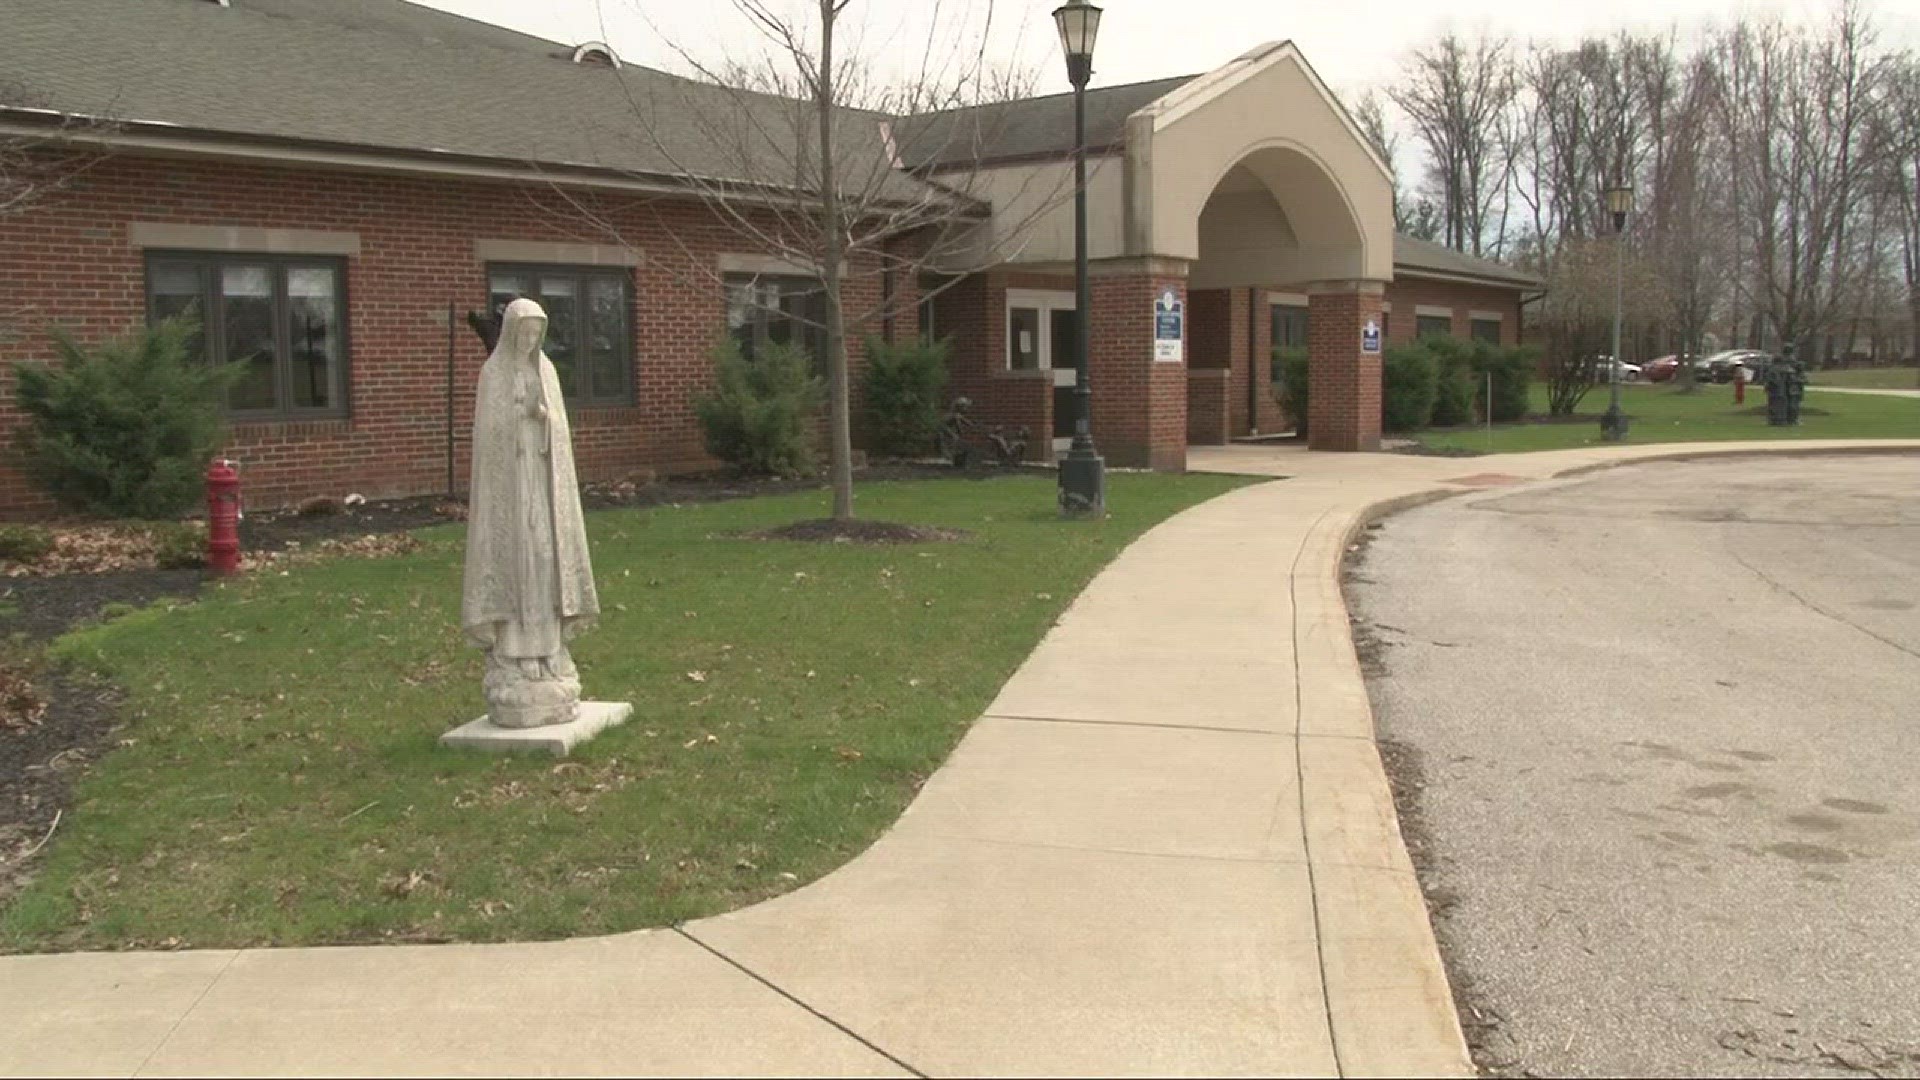 Diocese of Cleveland expands number of detox beds